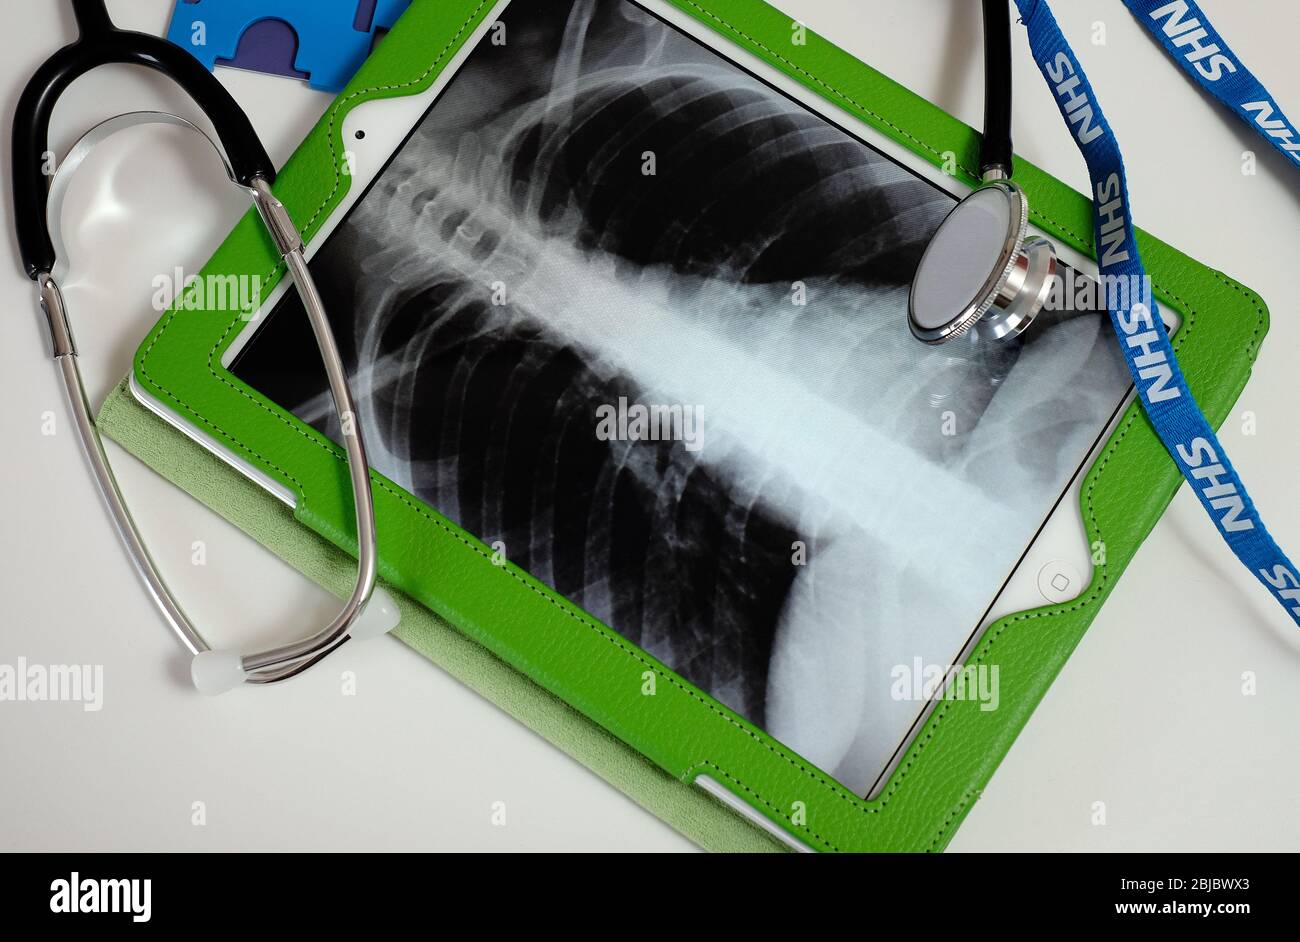 doctor's stethoscope and nhs lanyard on computer tablet back x-ray image Stock Photo